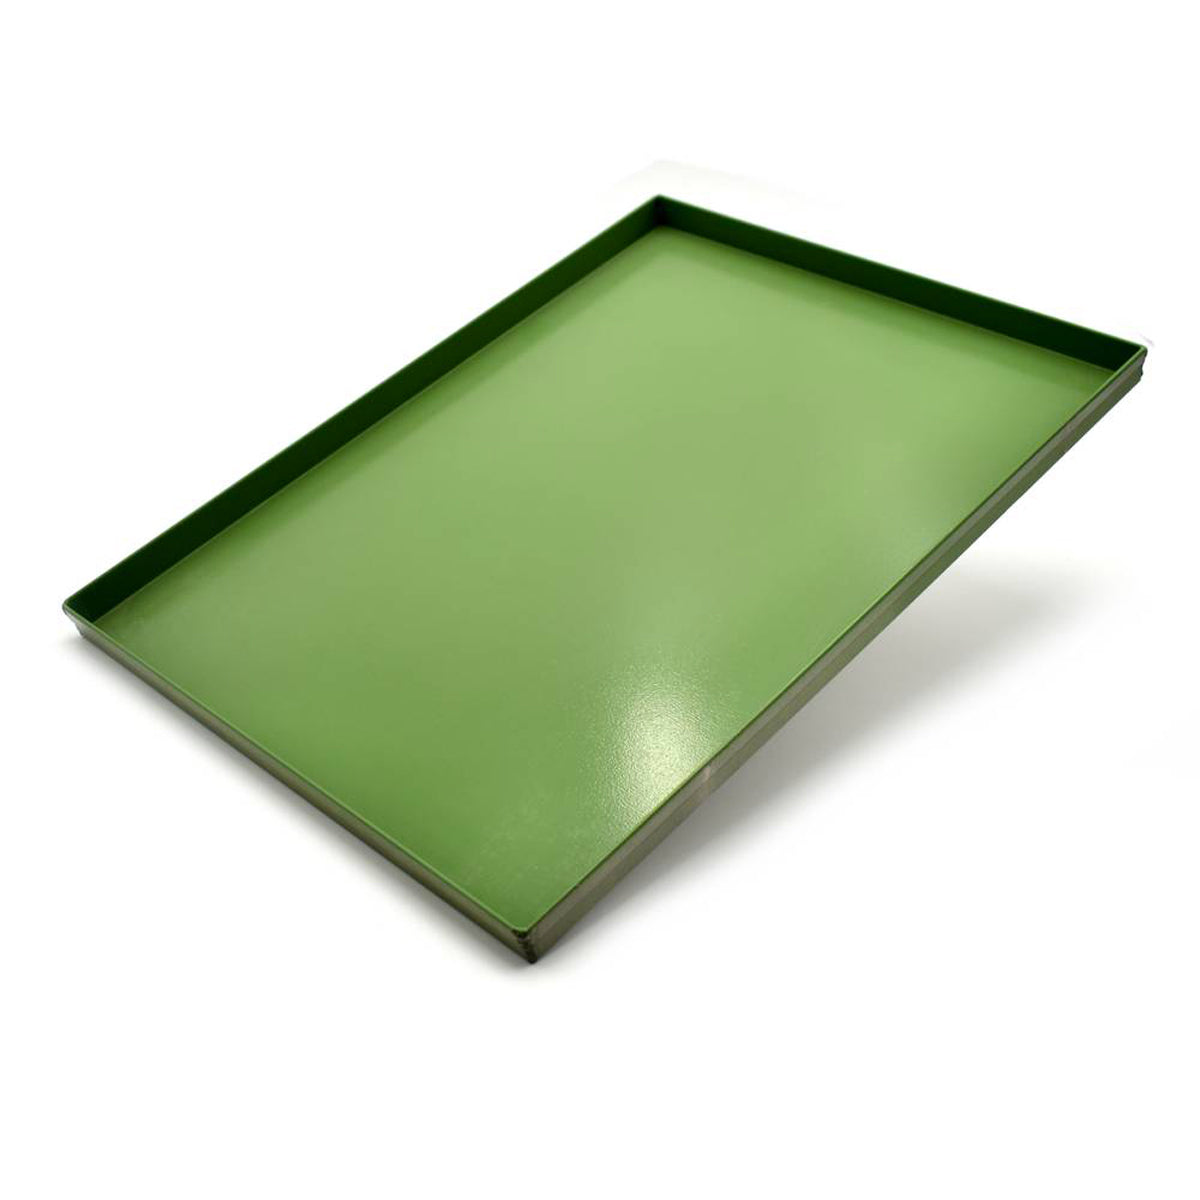 Flat with no edge Perforated Aluminum baking tray - 30 cm x 40 cm